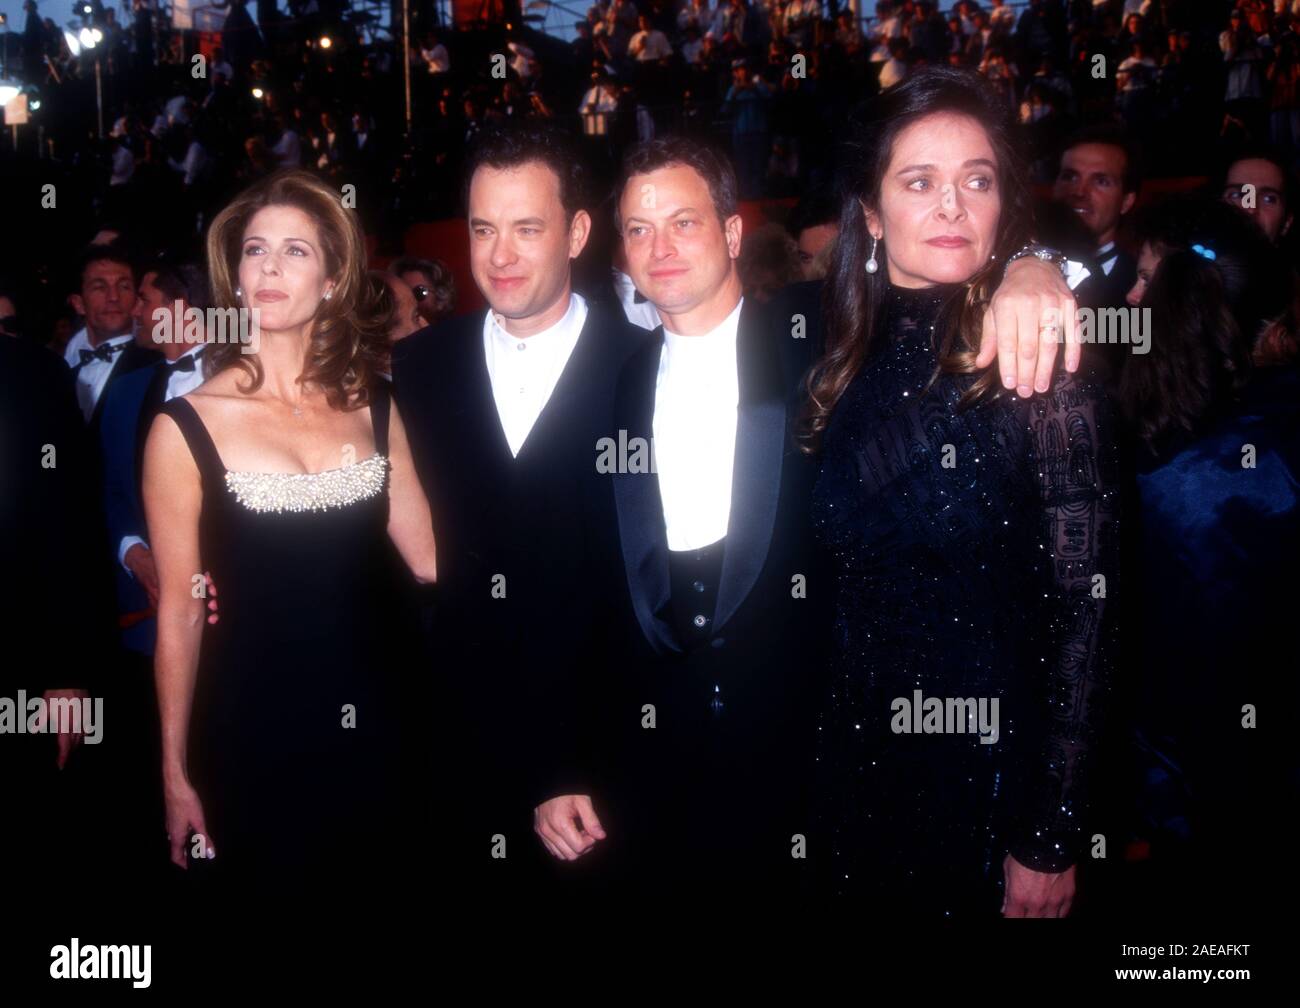 Los Angeles, California, USA 27th March 1995 Singer Rita Wilson, actor Tom Hanks, actor Gary Sinise and wife Moira Harris attend the 67th Annual Academy Awards on March 27, 1995 at the Shrine Auditorium in Los Angeles, California, USA. Photo by Barry King/Alamy Stock Photo Stock Photo